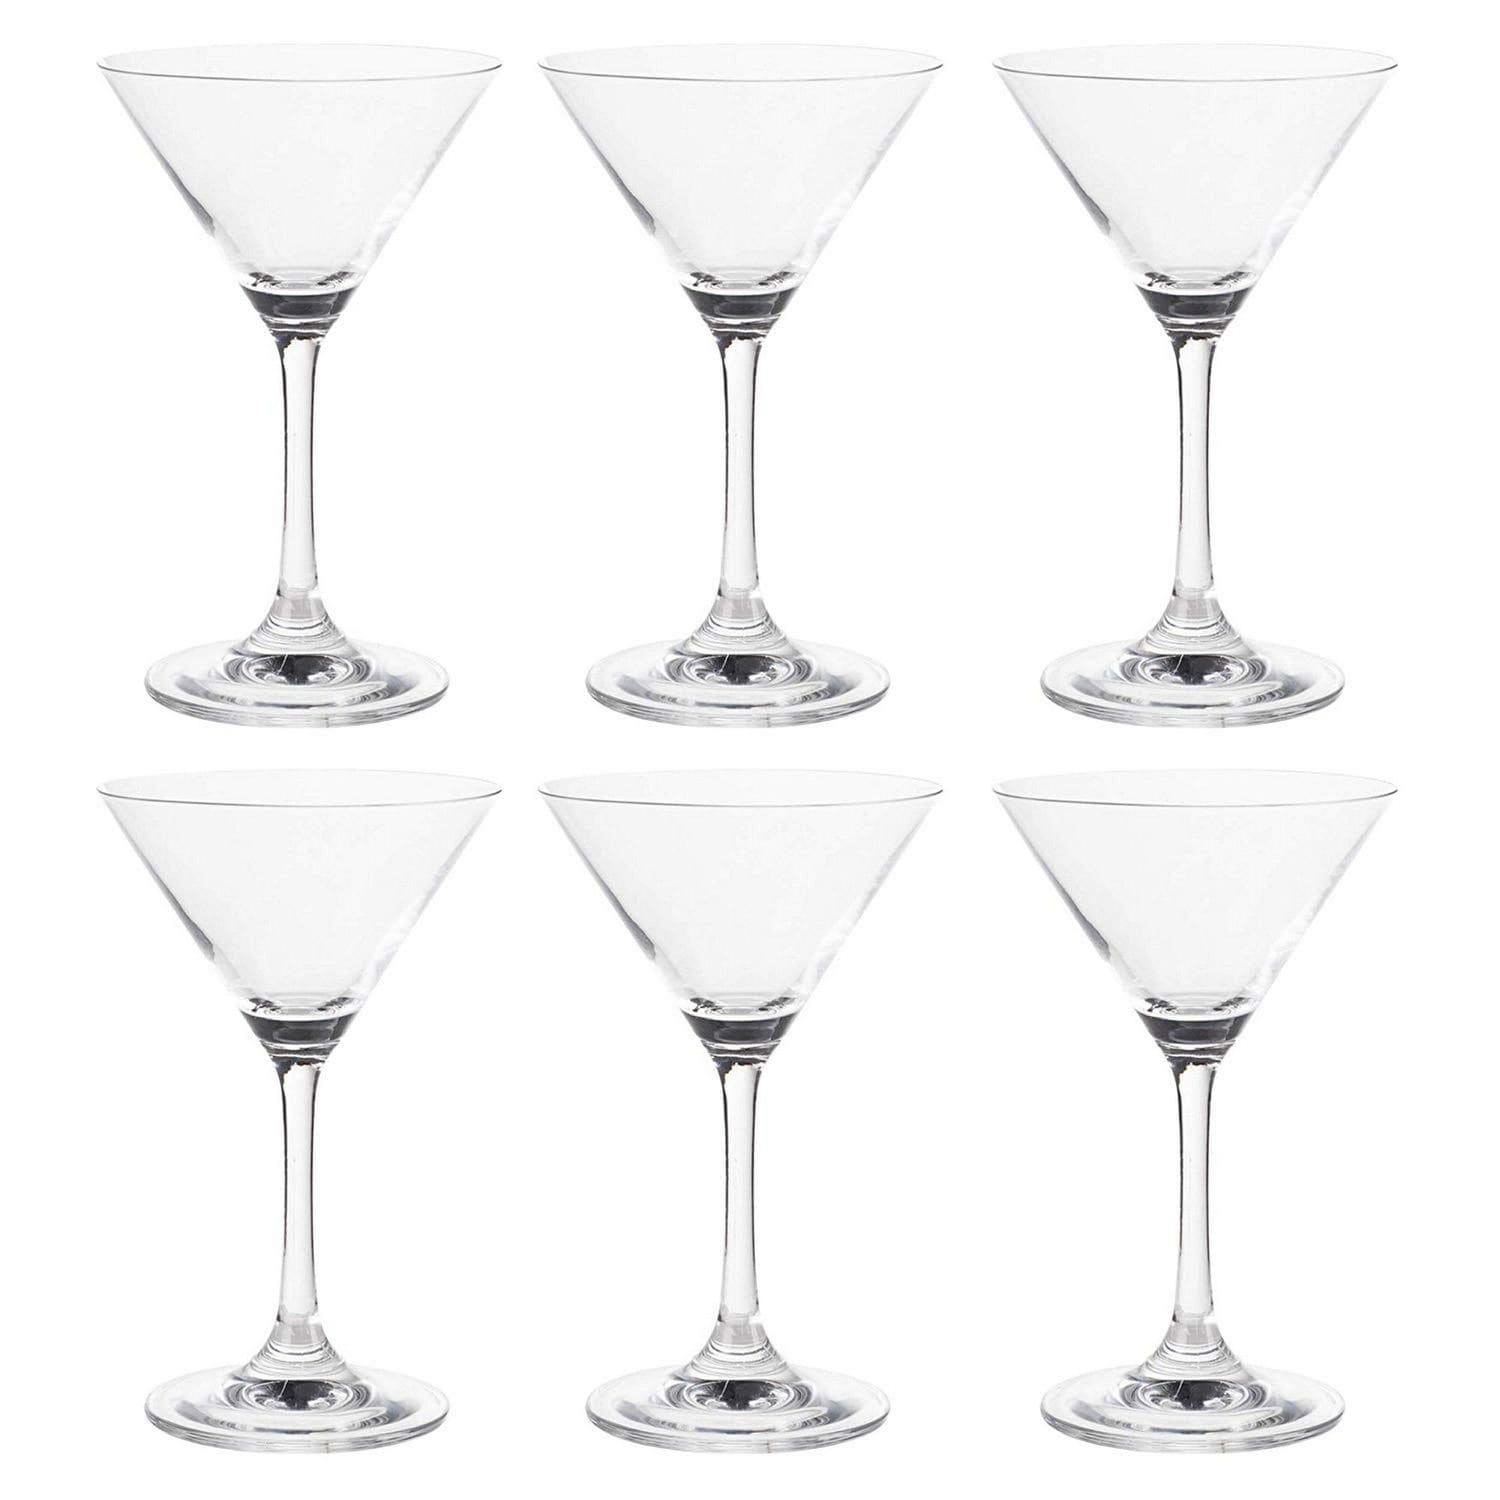 https://ak1.ostkcdn.com/images/products/30403440/Martini-Glasses-6-Set-Clear-Classic-5-Ounce-Cocktail-Glasses-Inverted-Cone-580669f7-6fb0-4cb9-8683-42abc3c6451d.jpg